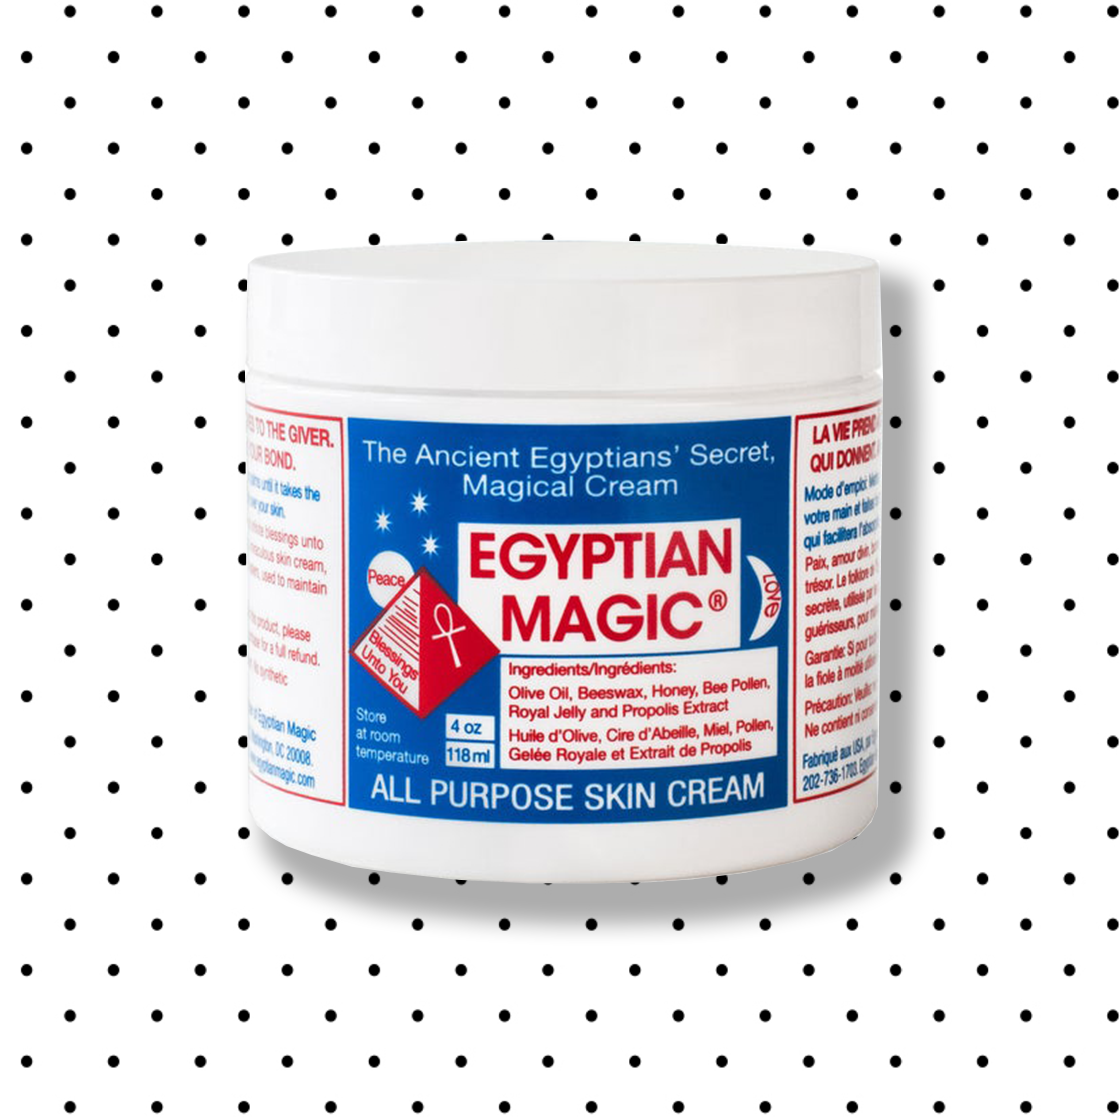 Is Egyptian Magic Cream Worth The Hype? – Beautiful With Brains